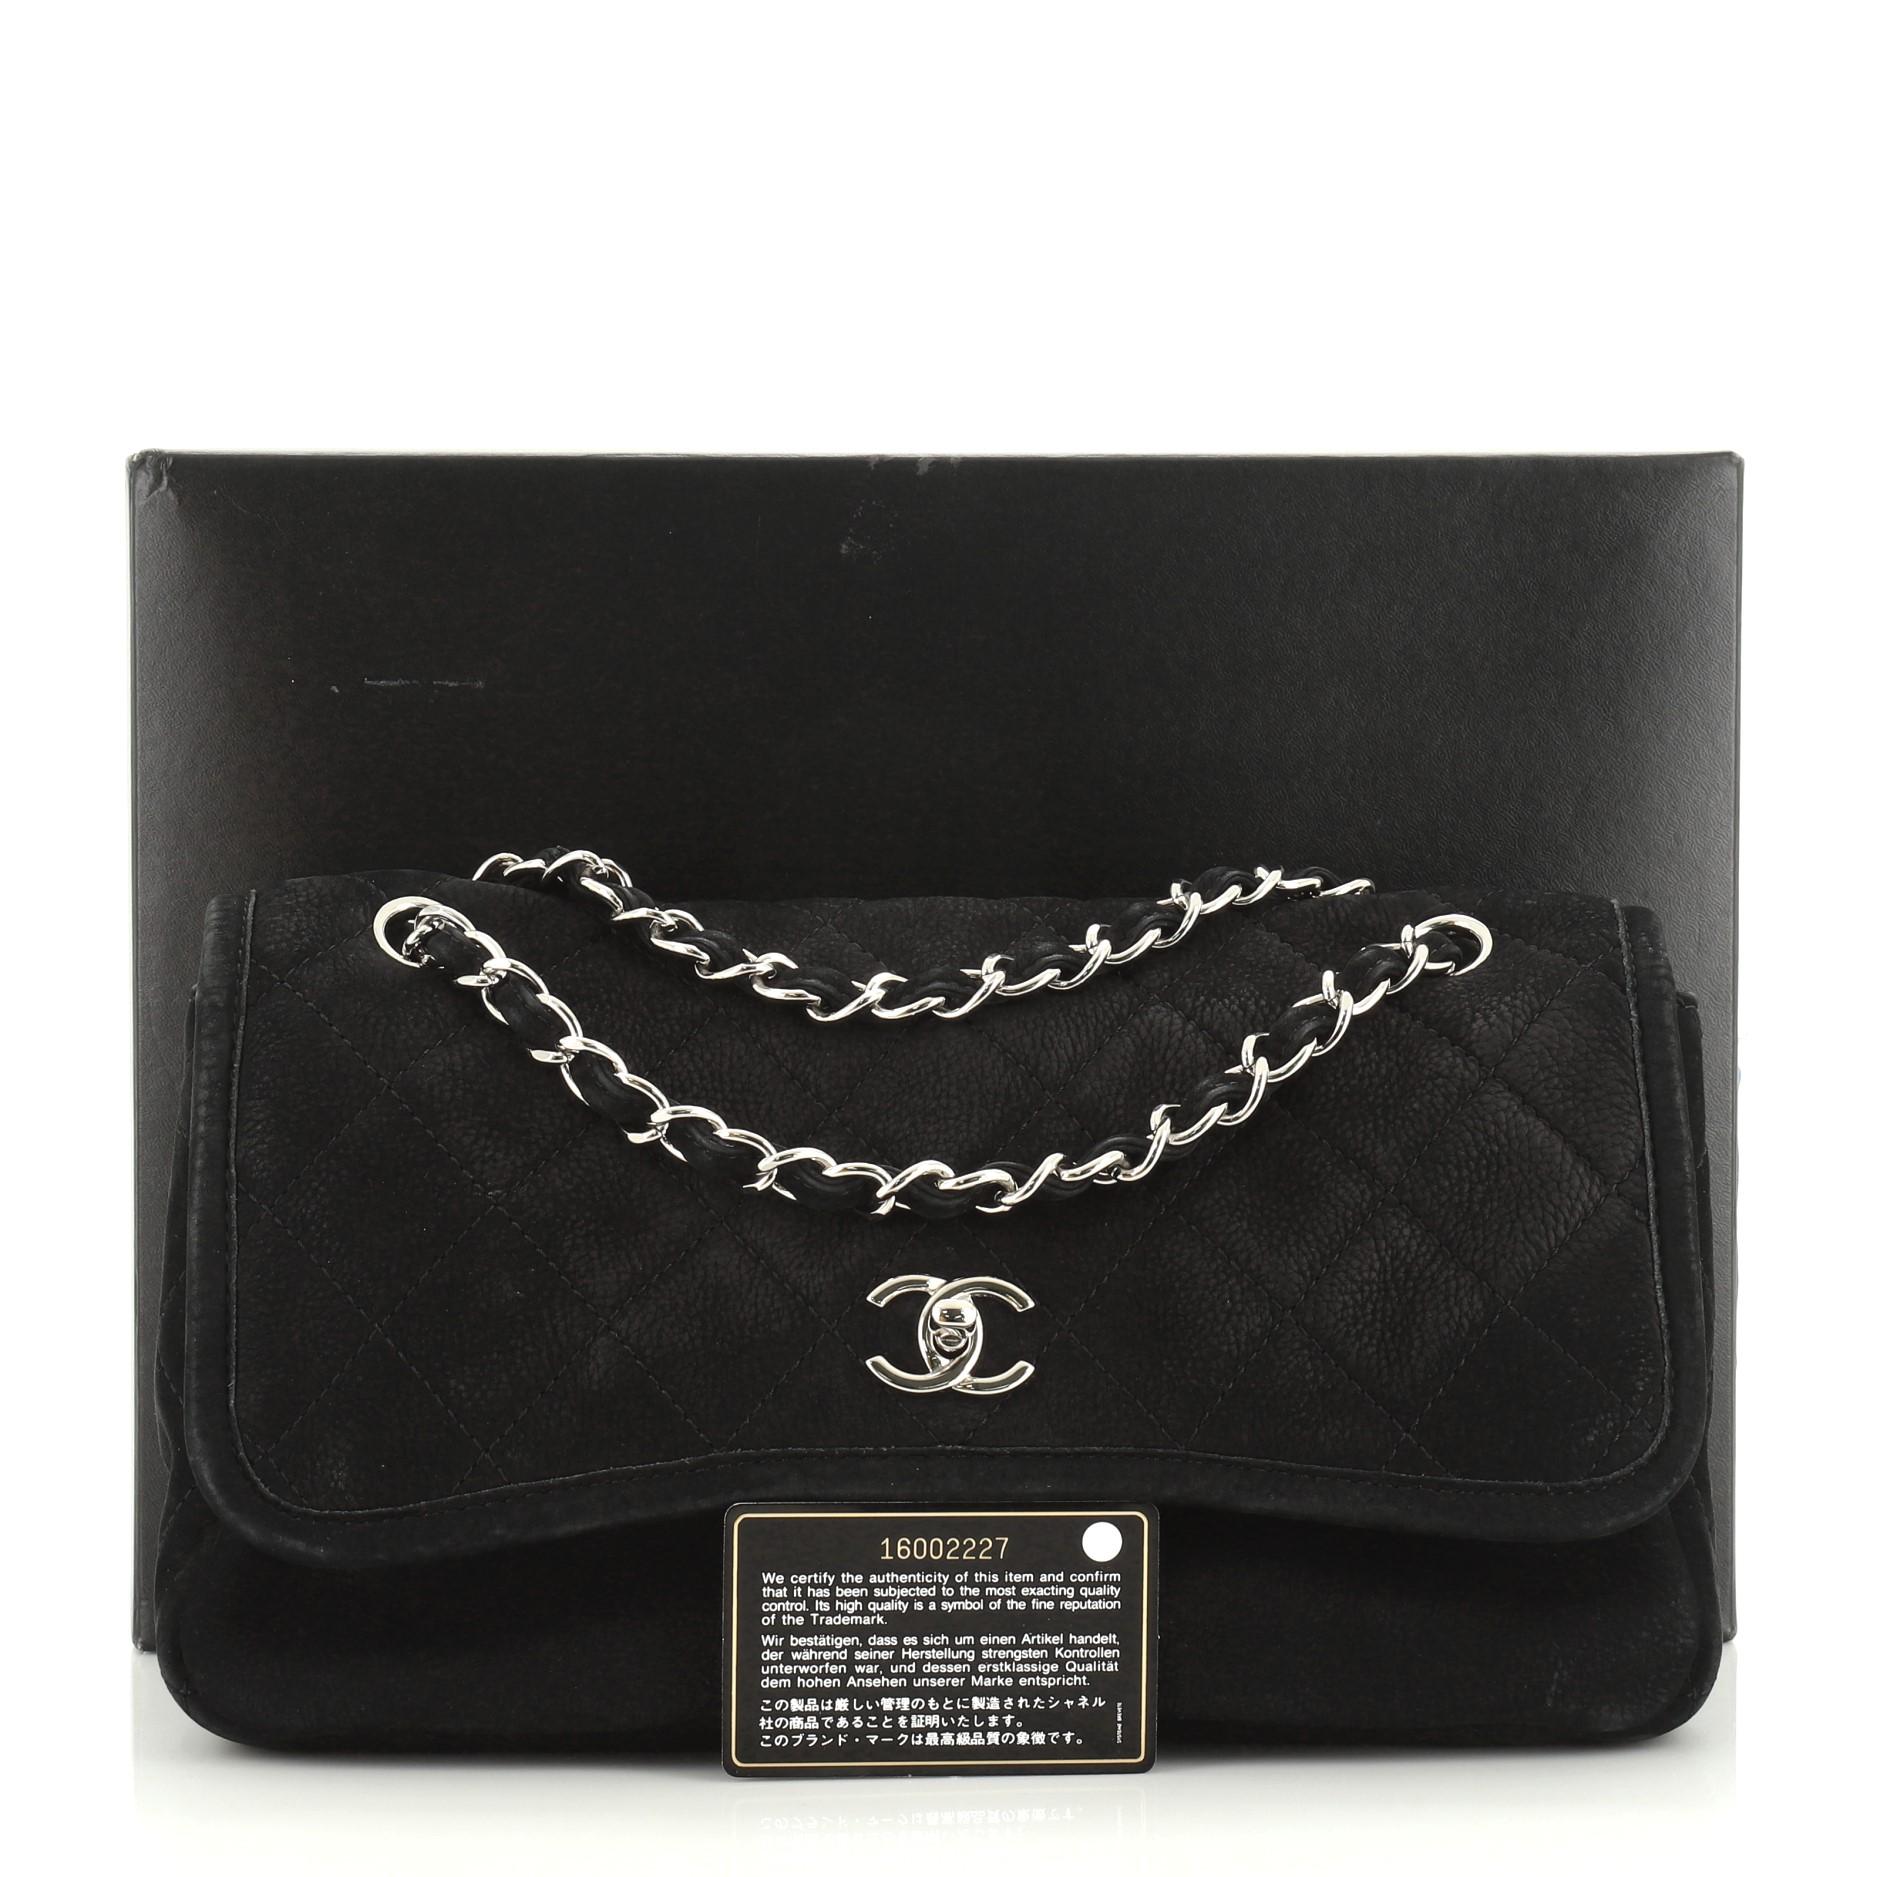 This Chanel Natural Beauty Split Pocket Flap Bag Quilted Nubuck Large, crafted in black quilted nubuck, features woven-in leather chain straps, two slip pockets under flap and silver-tone hardware. Its CC turn-lock closure opens to a black fabric